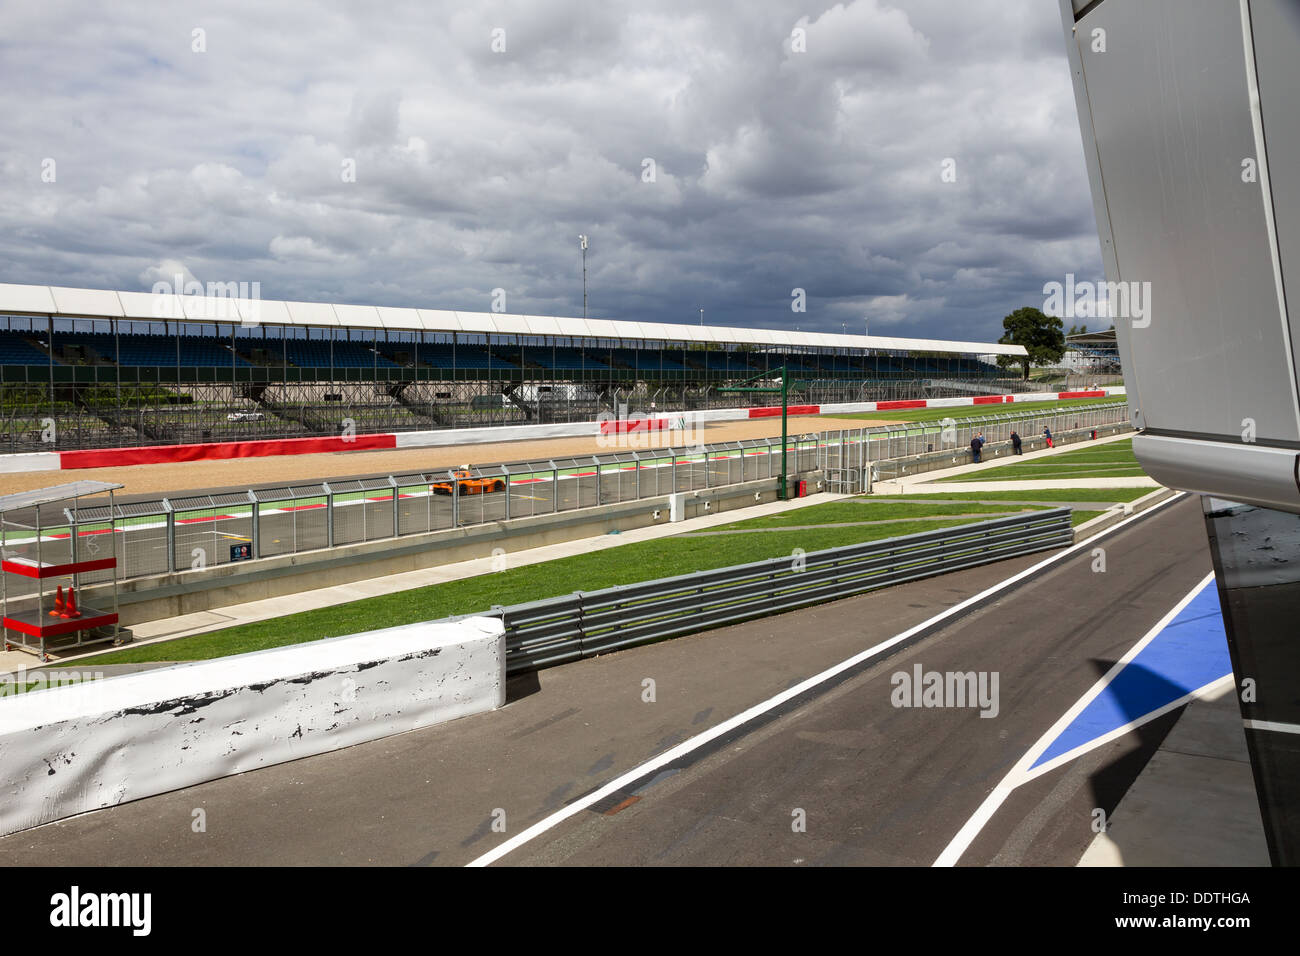 The Start / Finish straight at Silverstone Racing Circuit, including the grandstand and pit lane, taken from the podium. Stock Photo